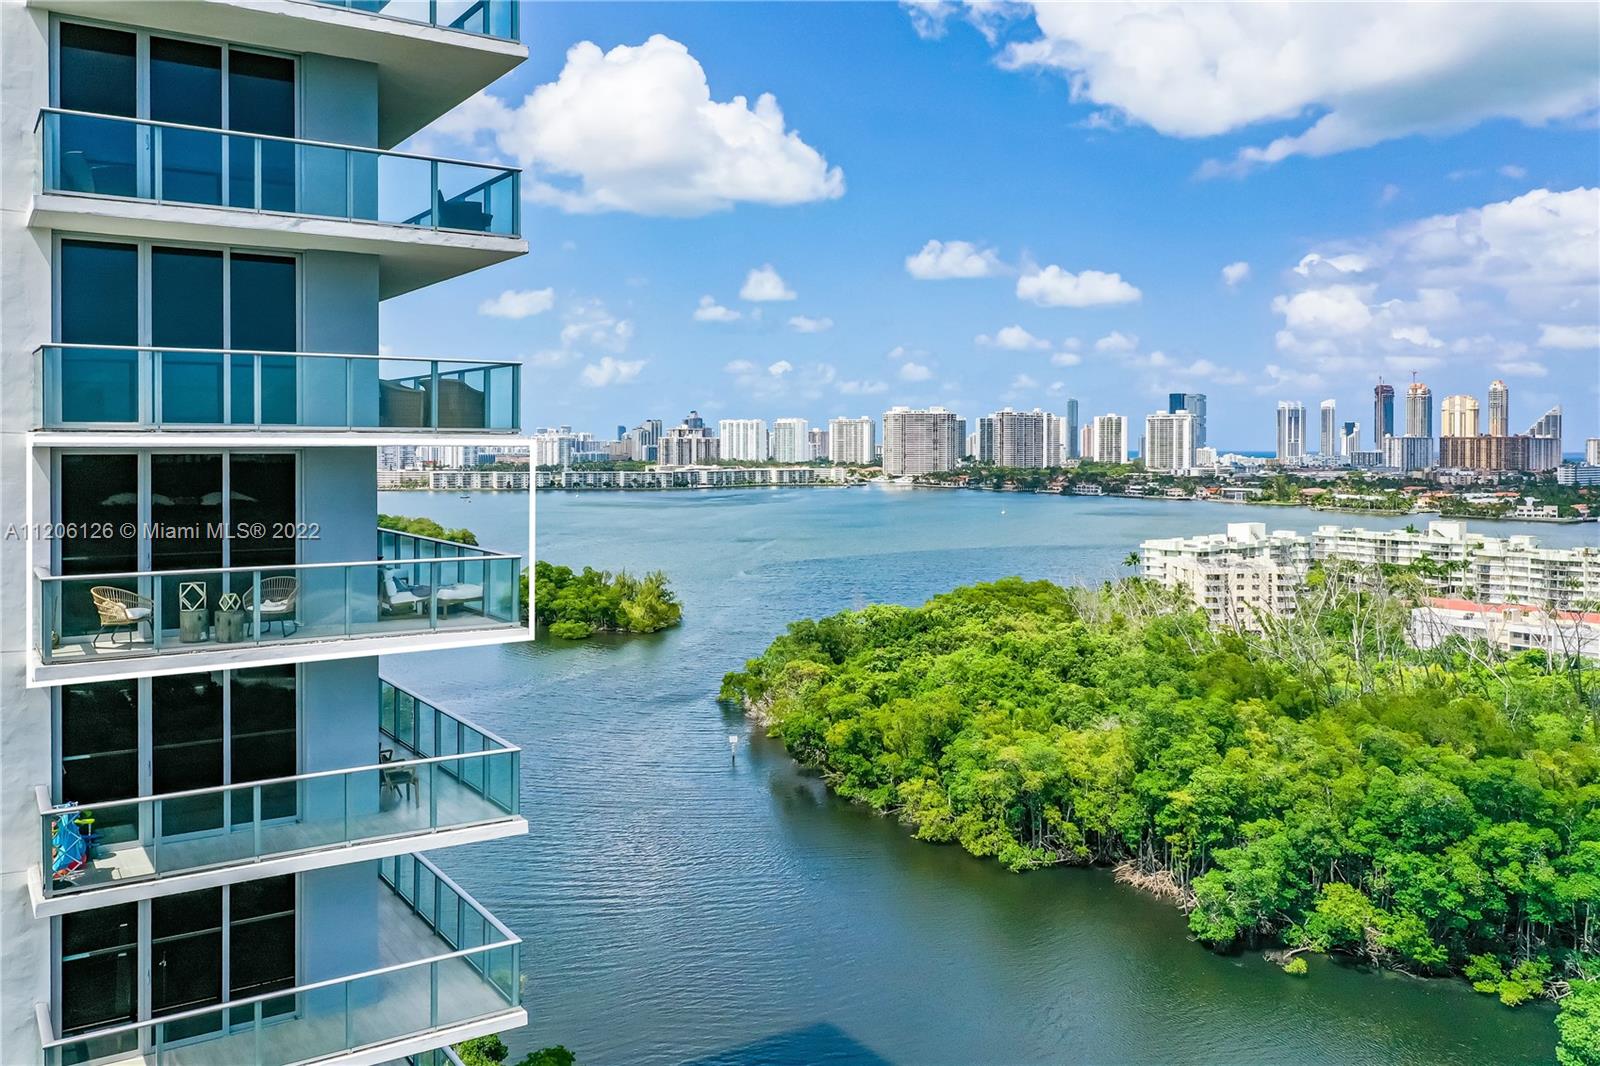 Corner Unit 1621 - The Best Corner Unit with East, South and West Views ! Water Views and Oleta National Park Views